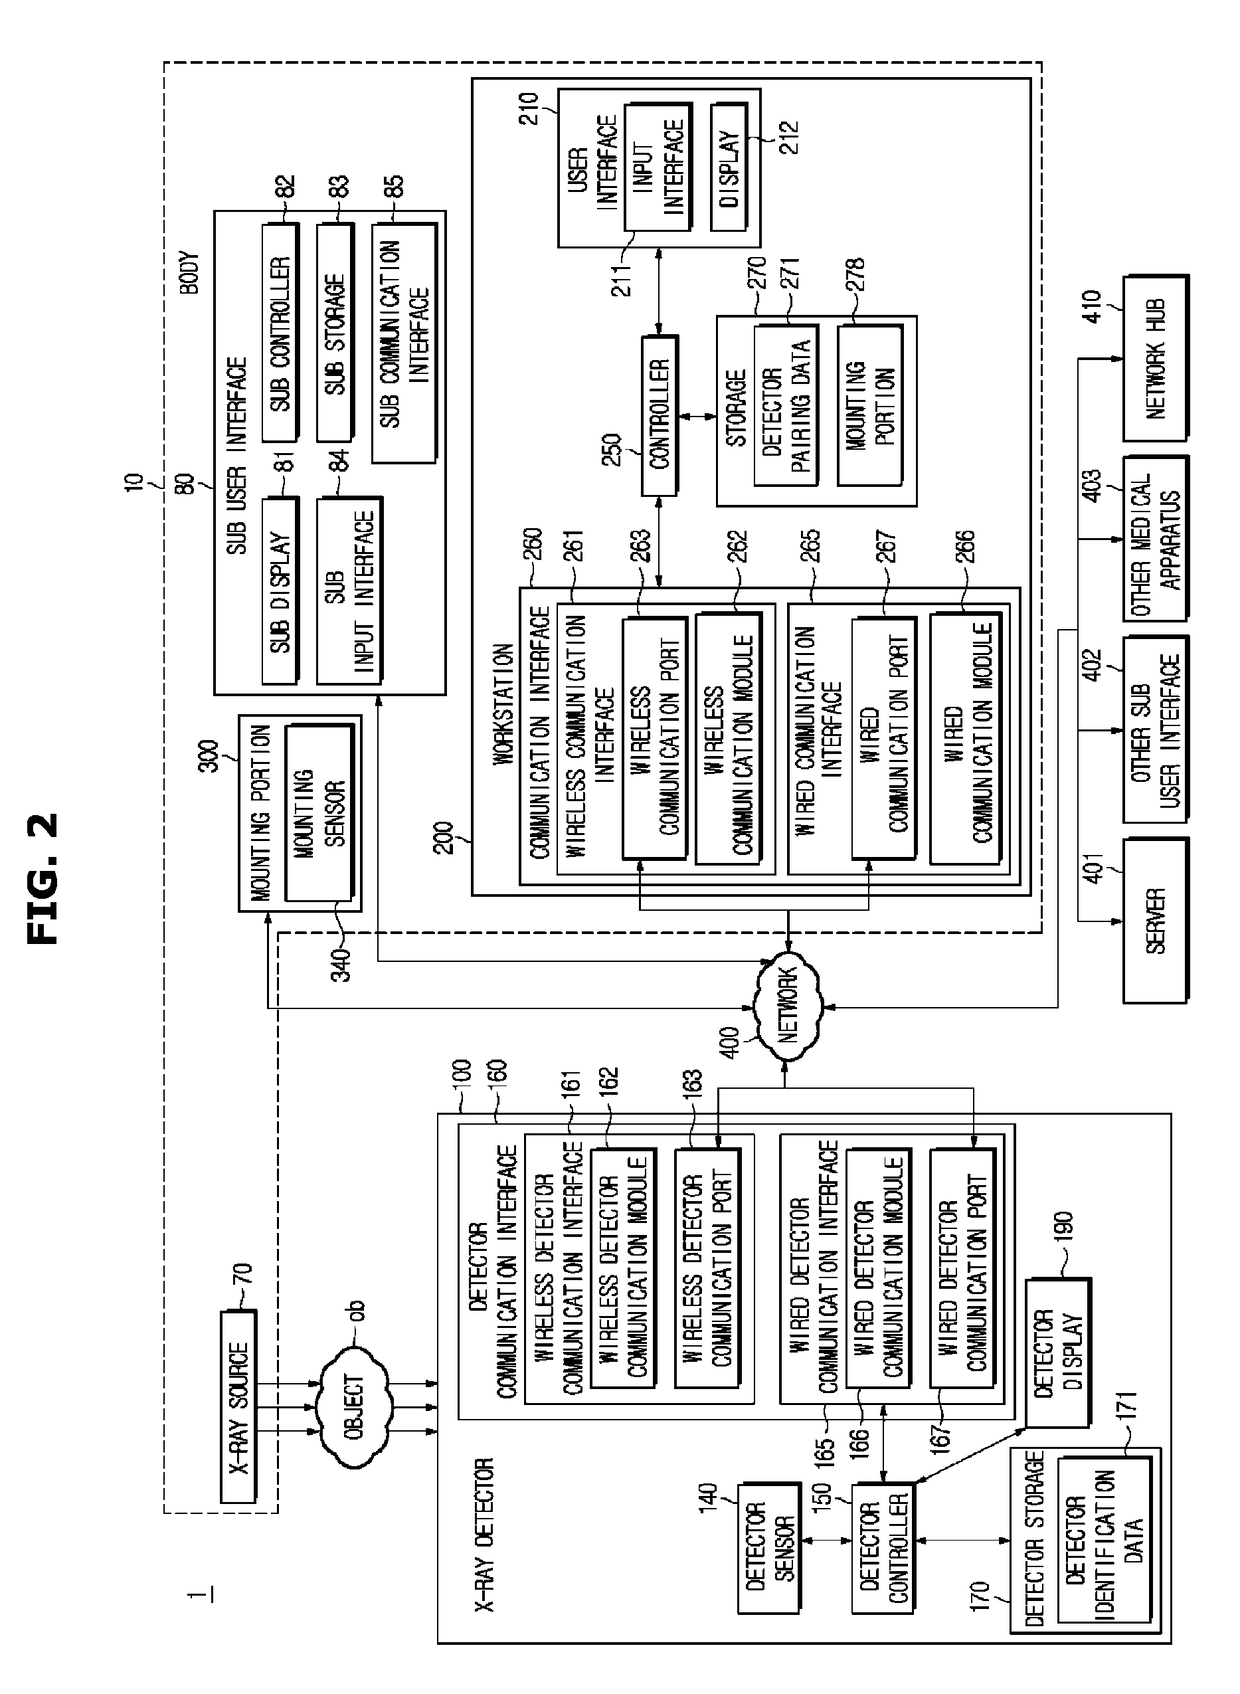 X-ray imaging apparatus, method of controlling the same, and X-ray imaging system